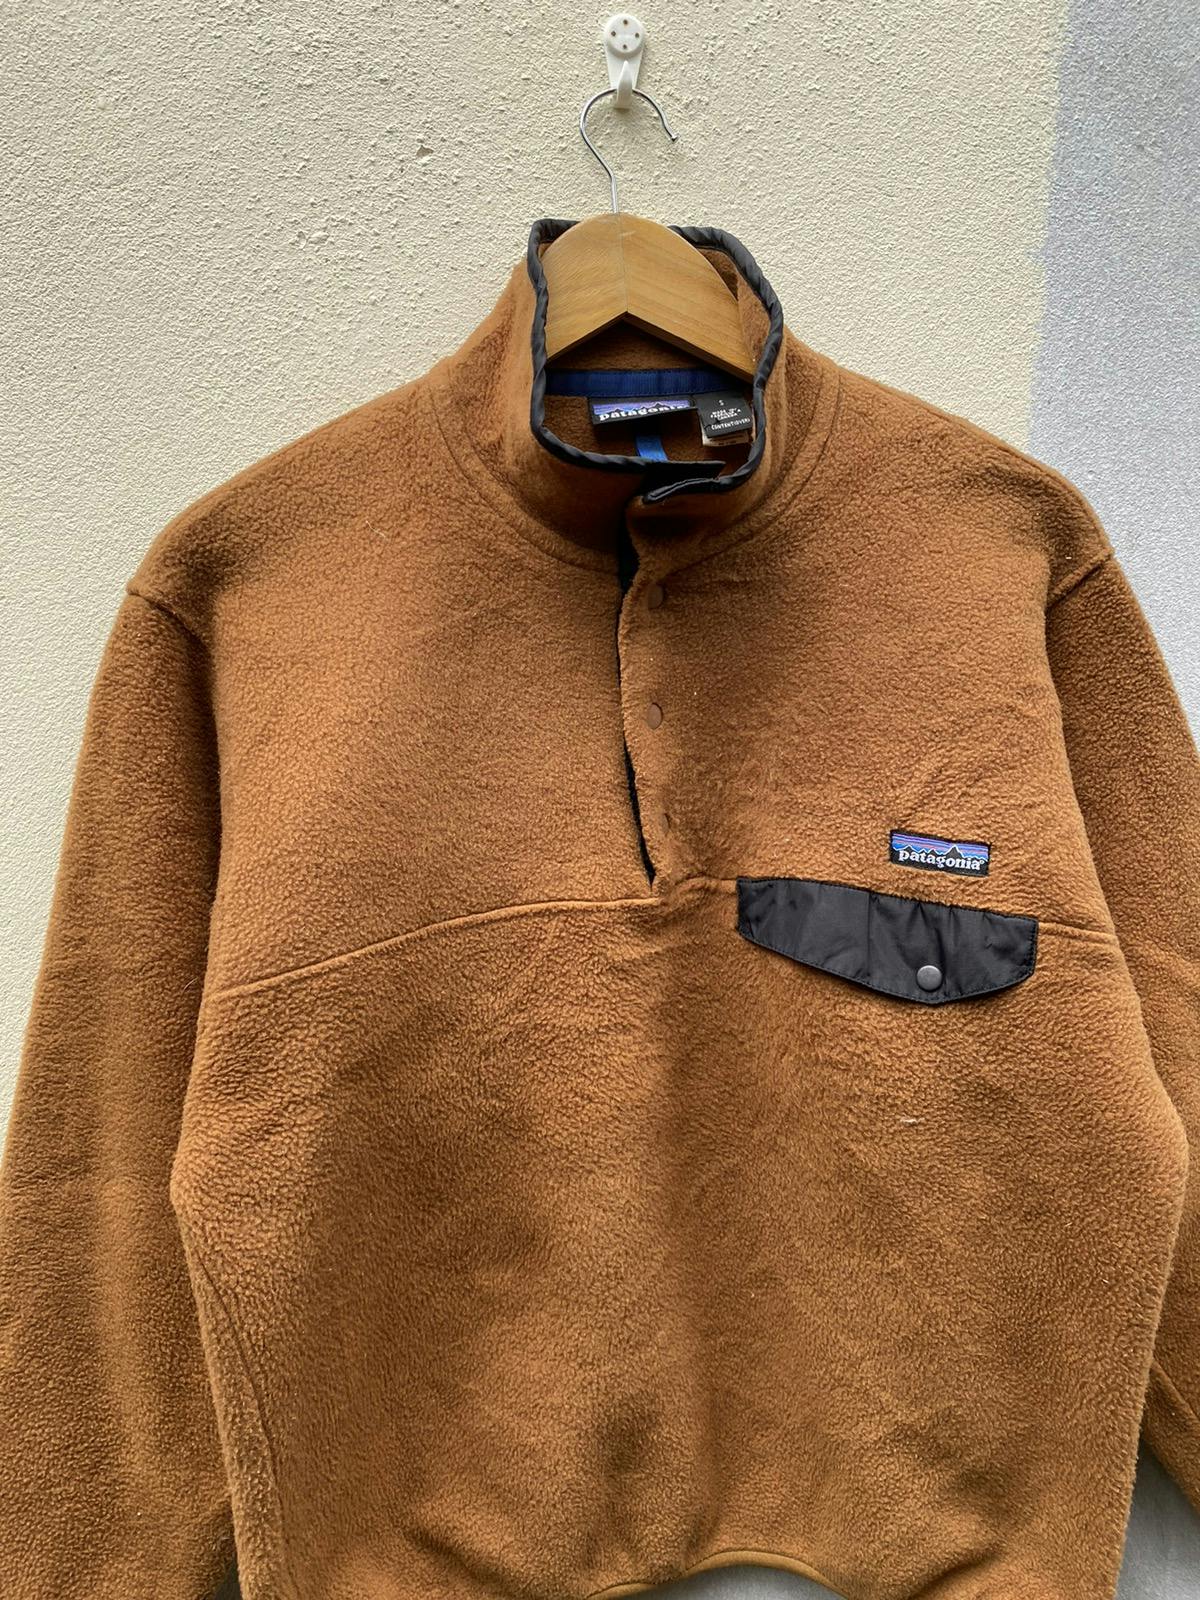 Patagonia Snap-T Fleece Brow Sweaters - 2